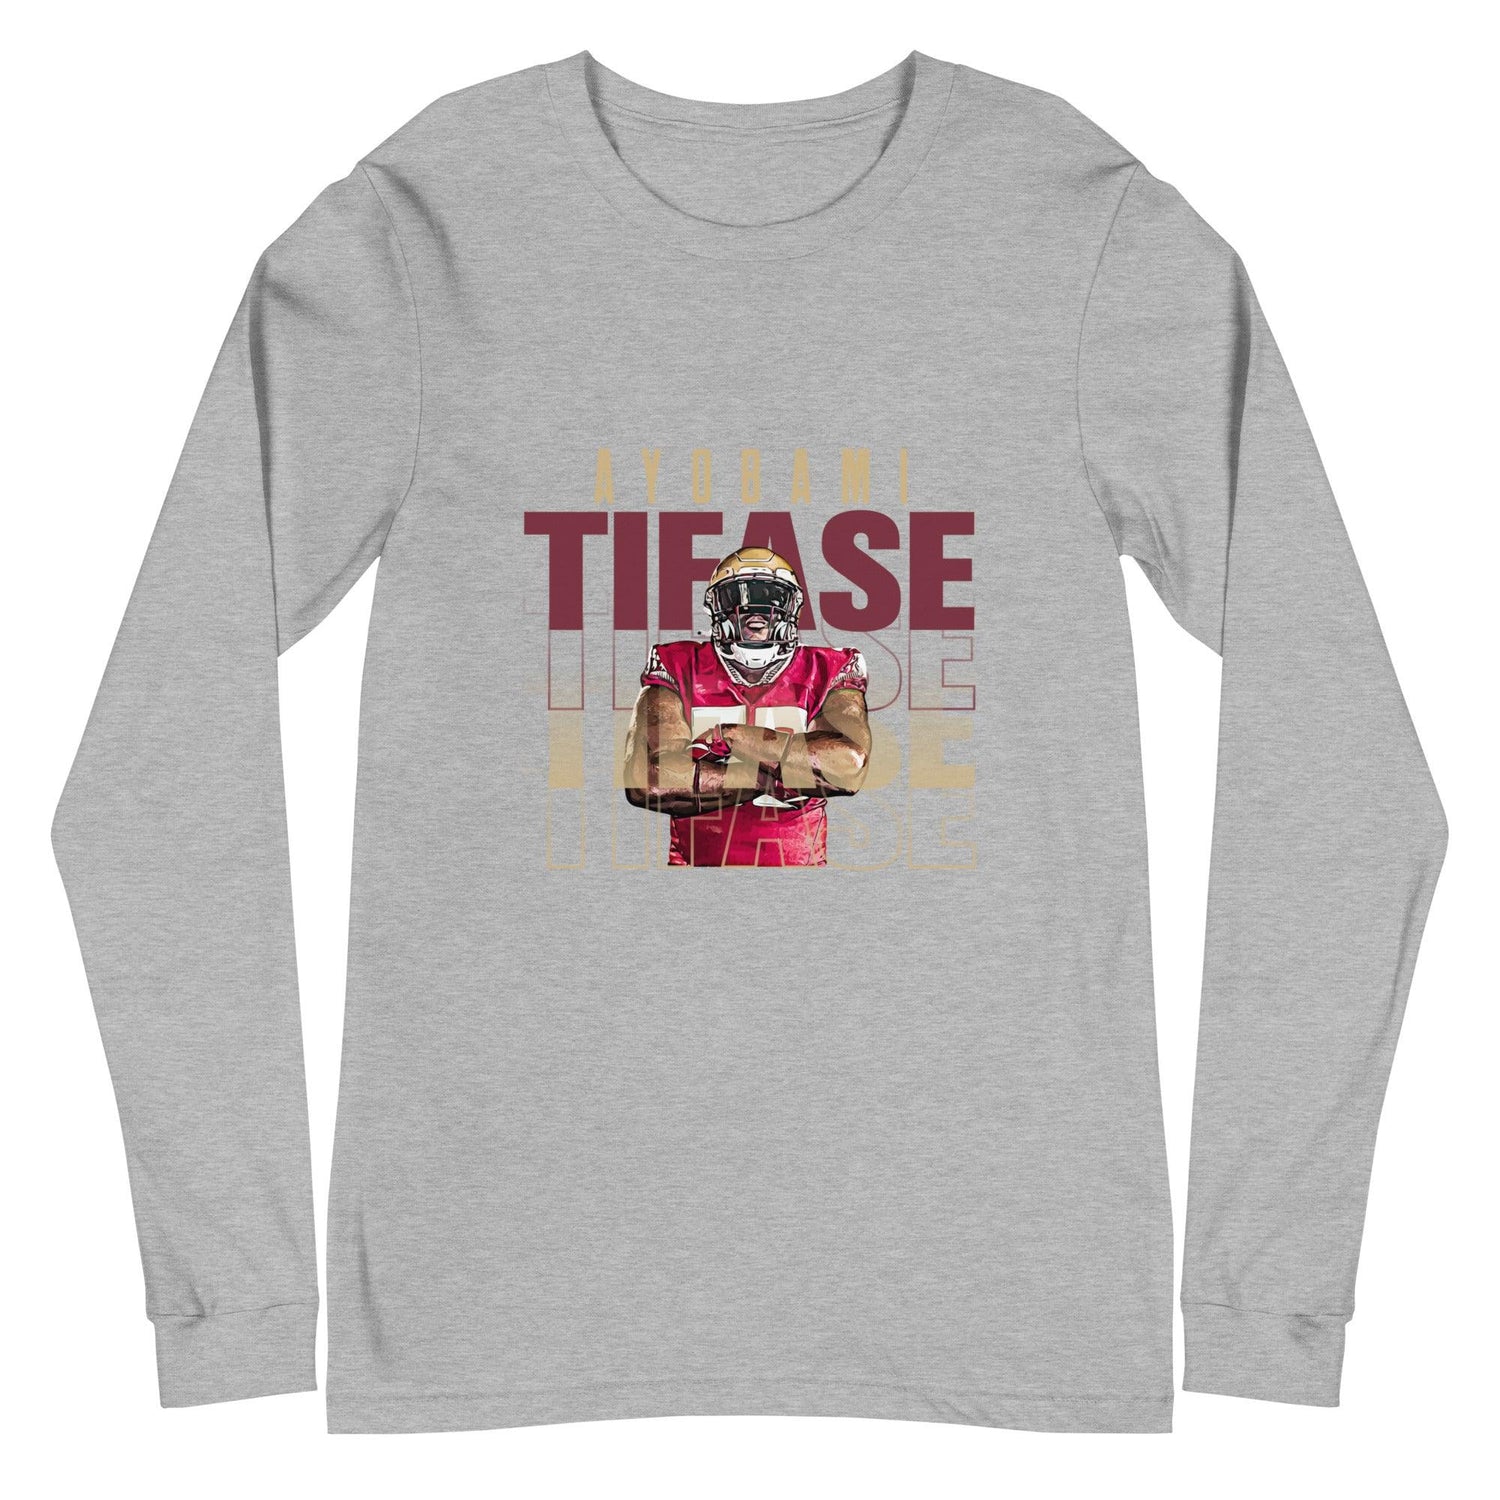 Ayobami Tifase "Repeat" Long Sleeve Tee - Fan Arch